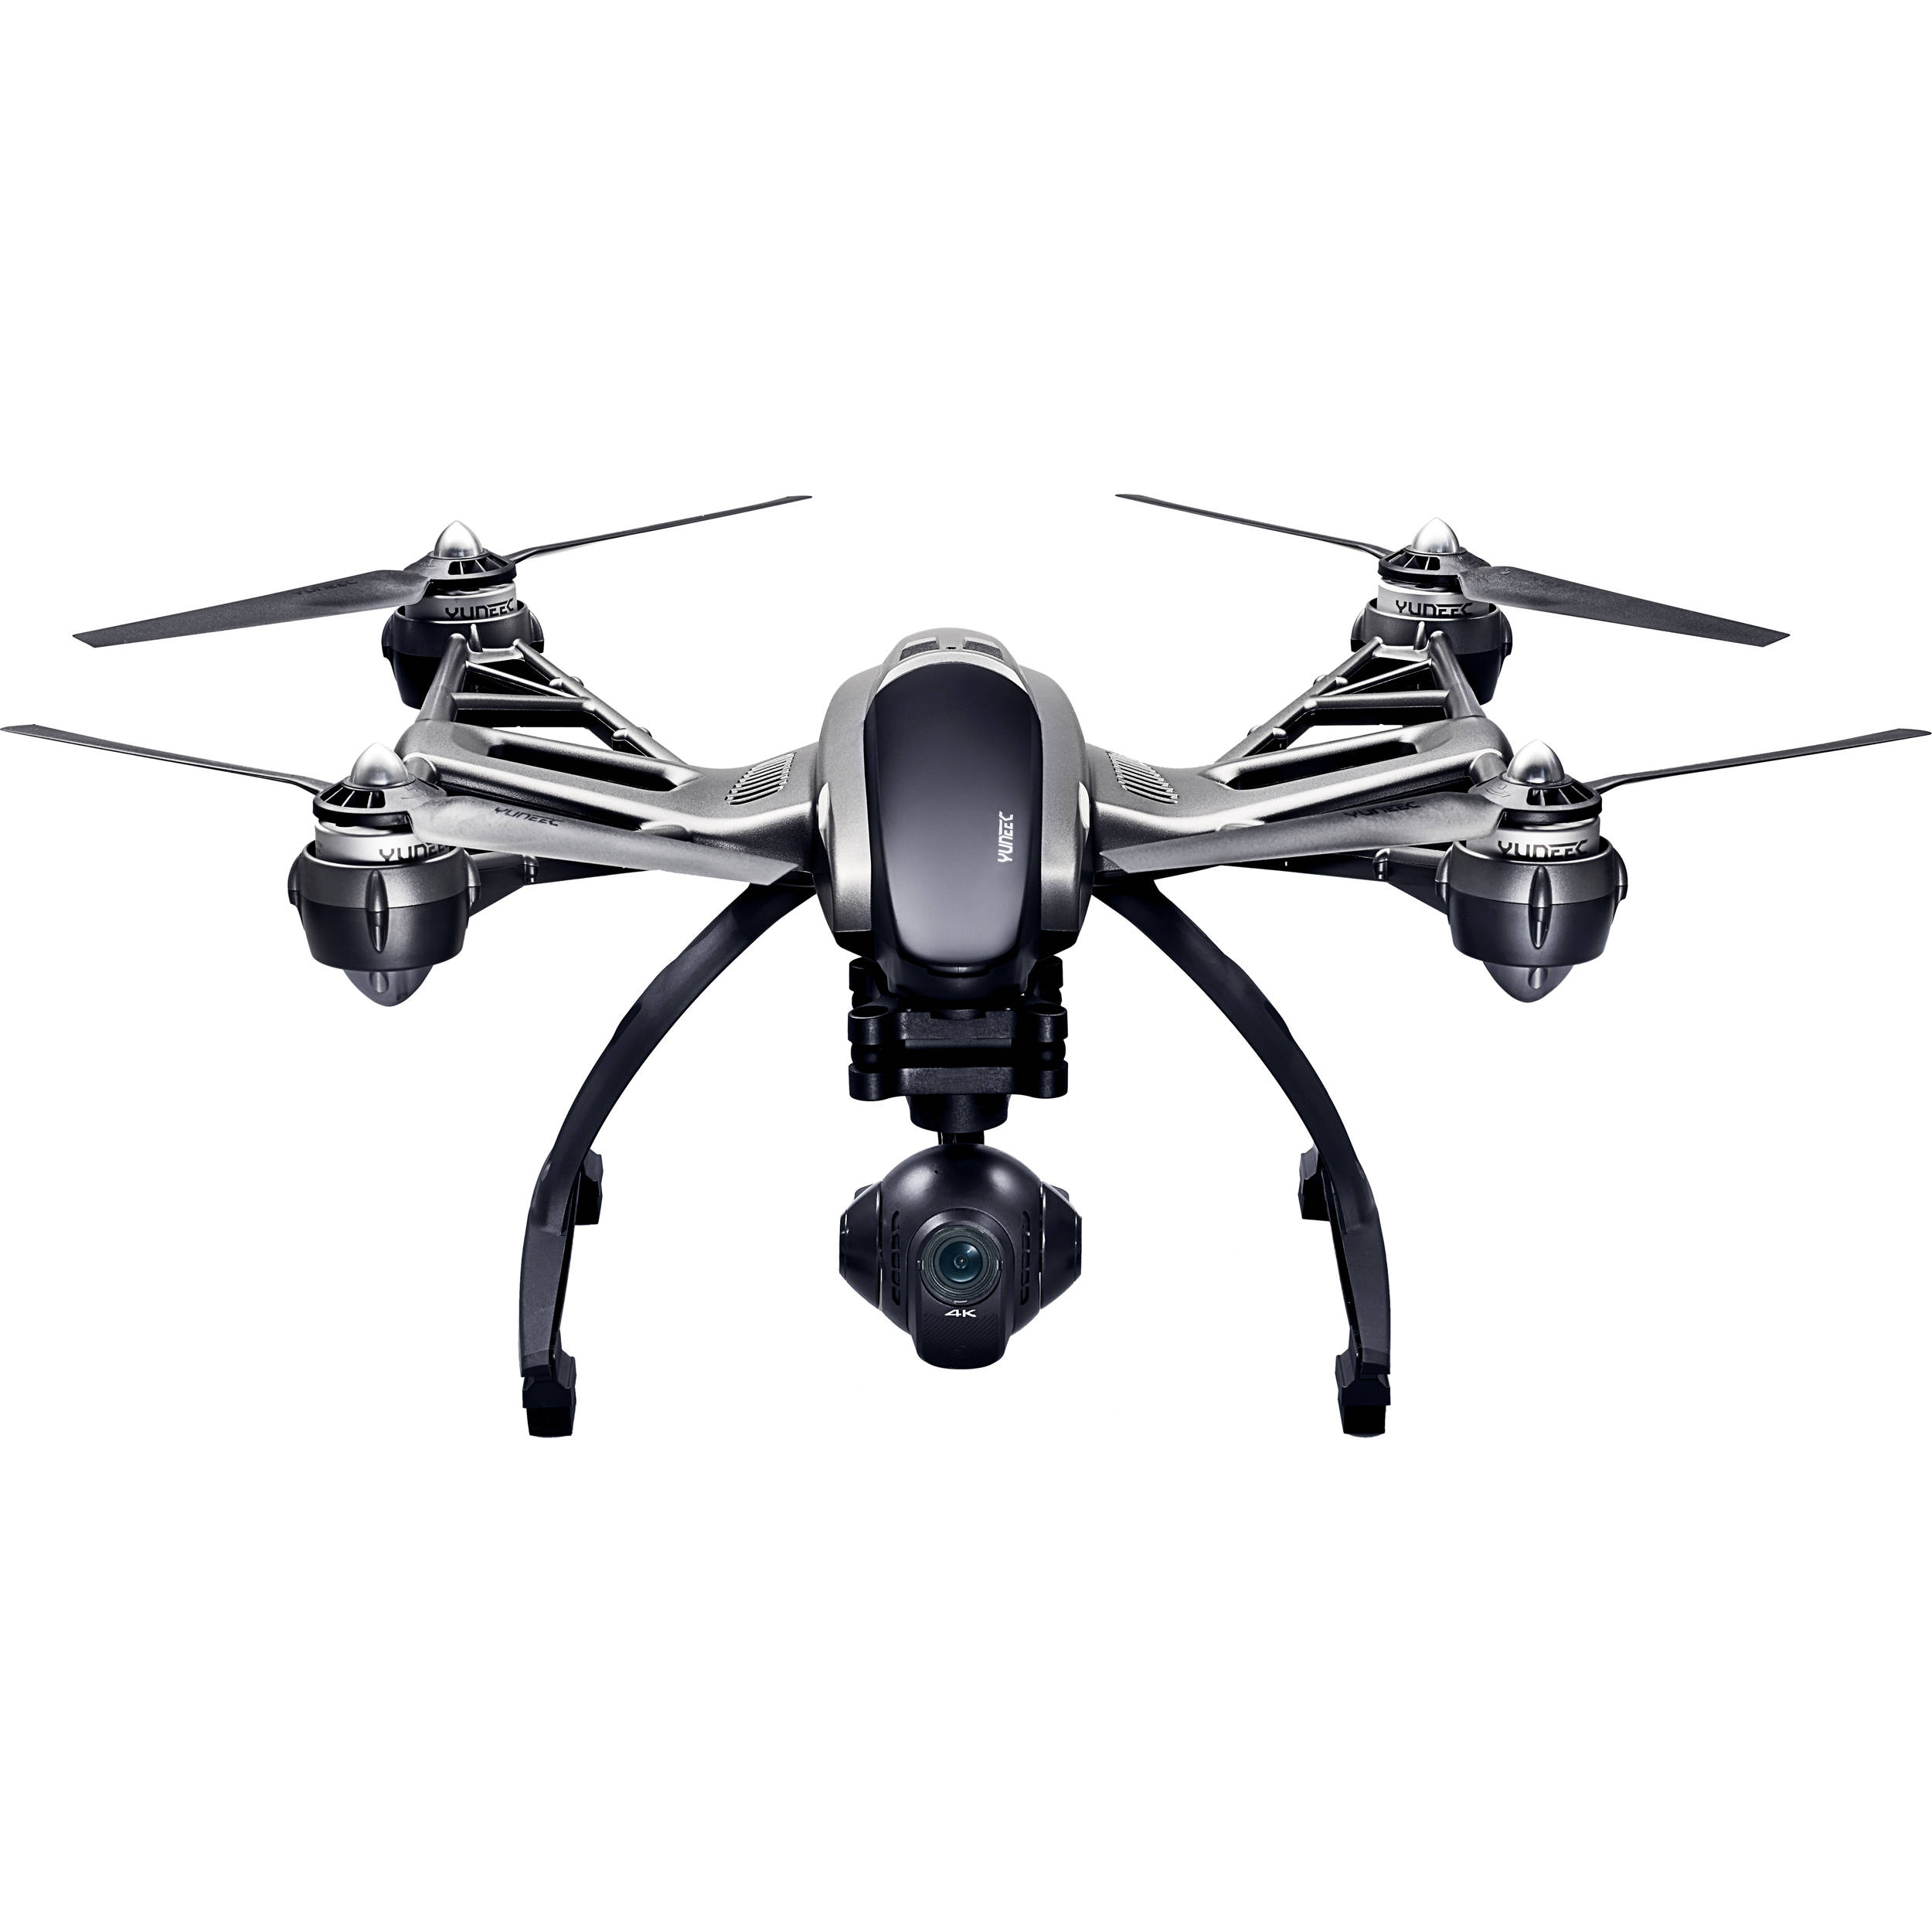 YUNEEC Q500 4K Typhoon Quadcopter with CGO3 Camera, YUNQ4KTUS